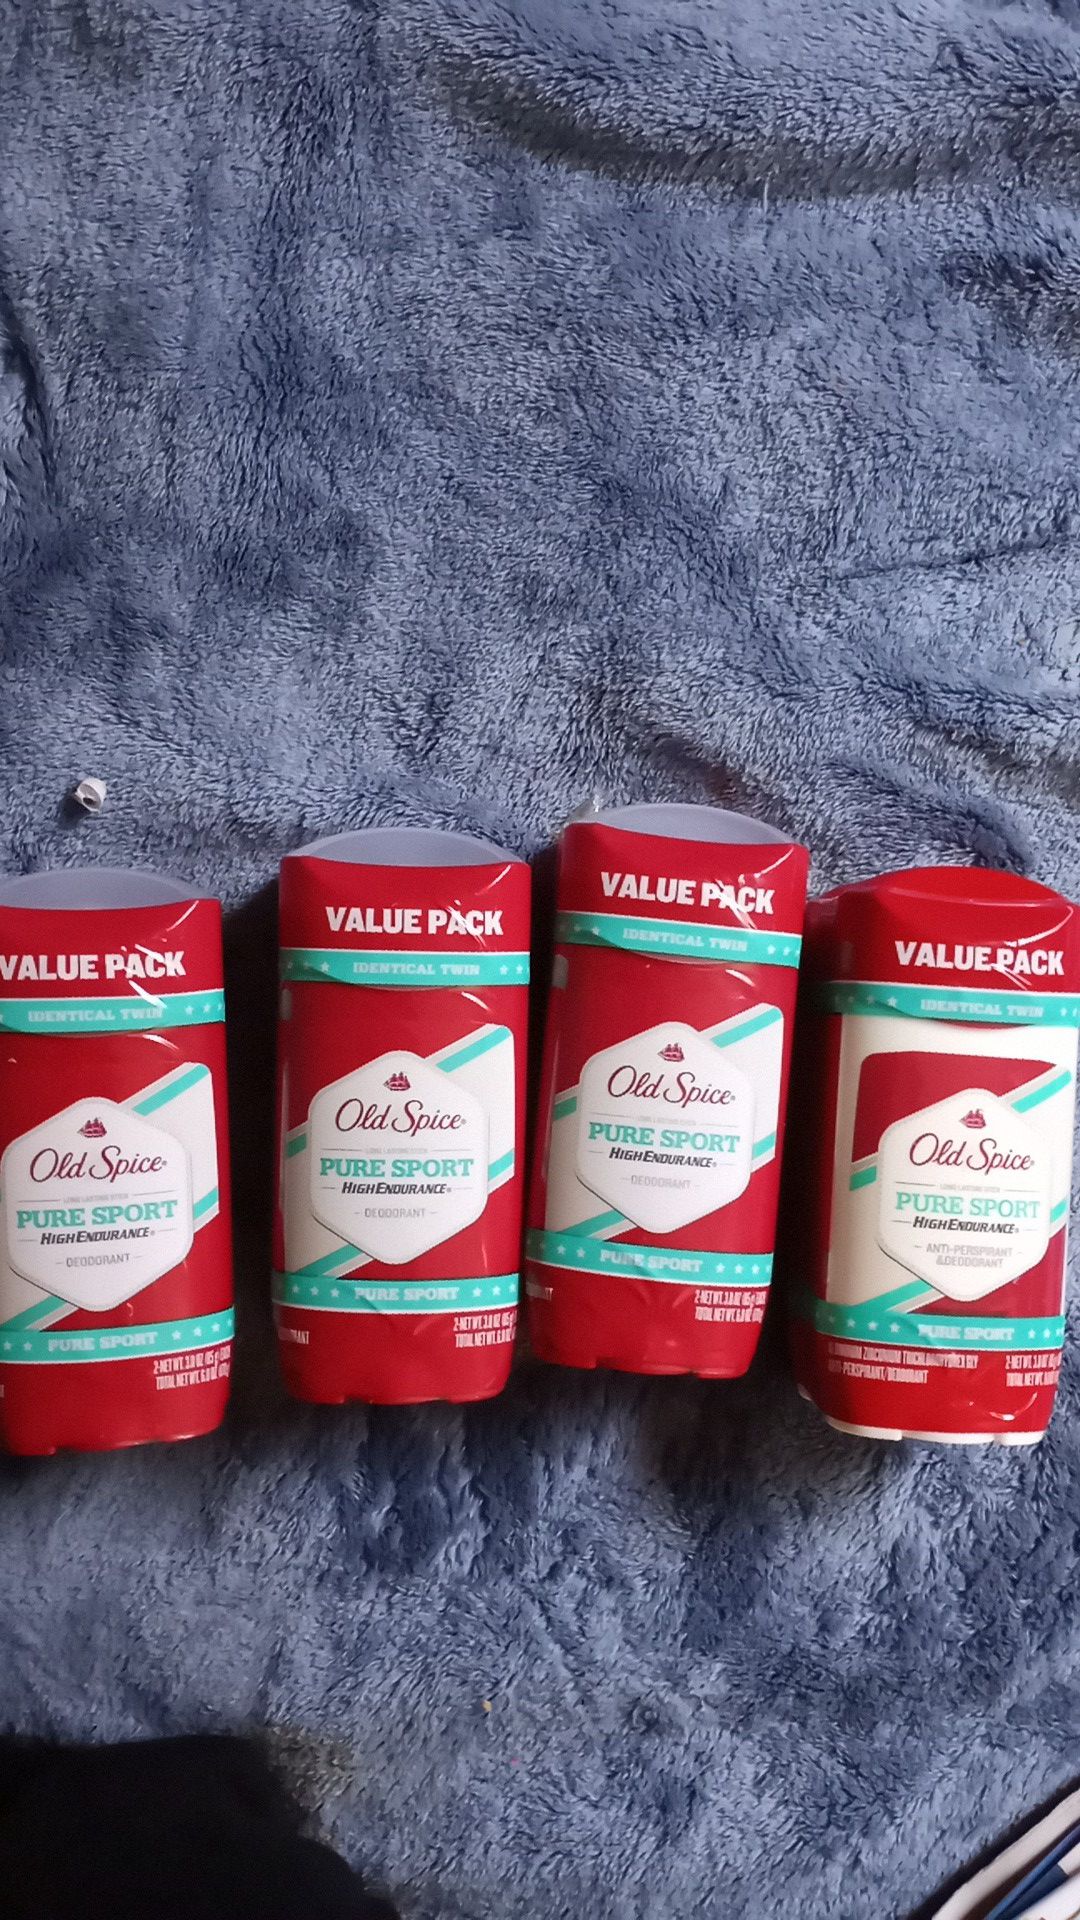 4 Value pack old spice must pick up